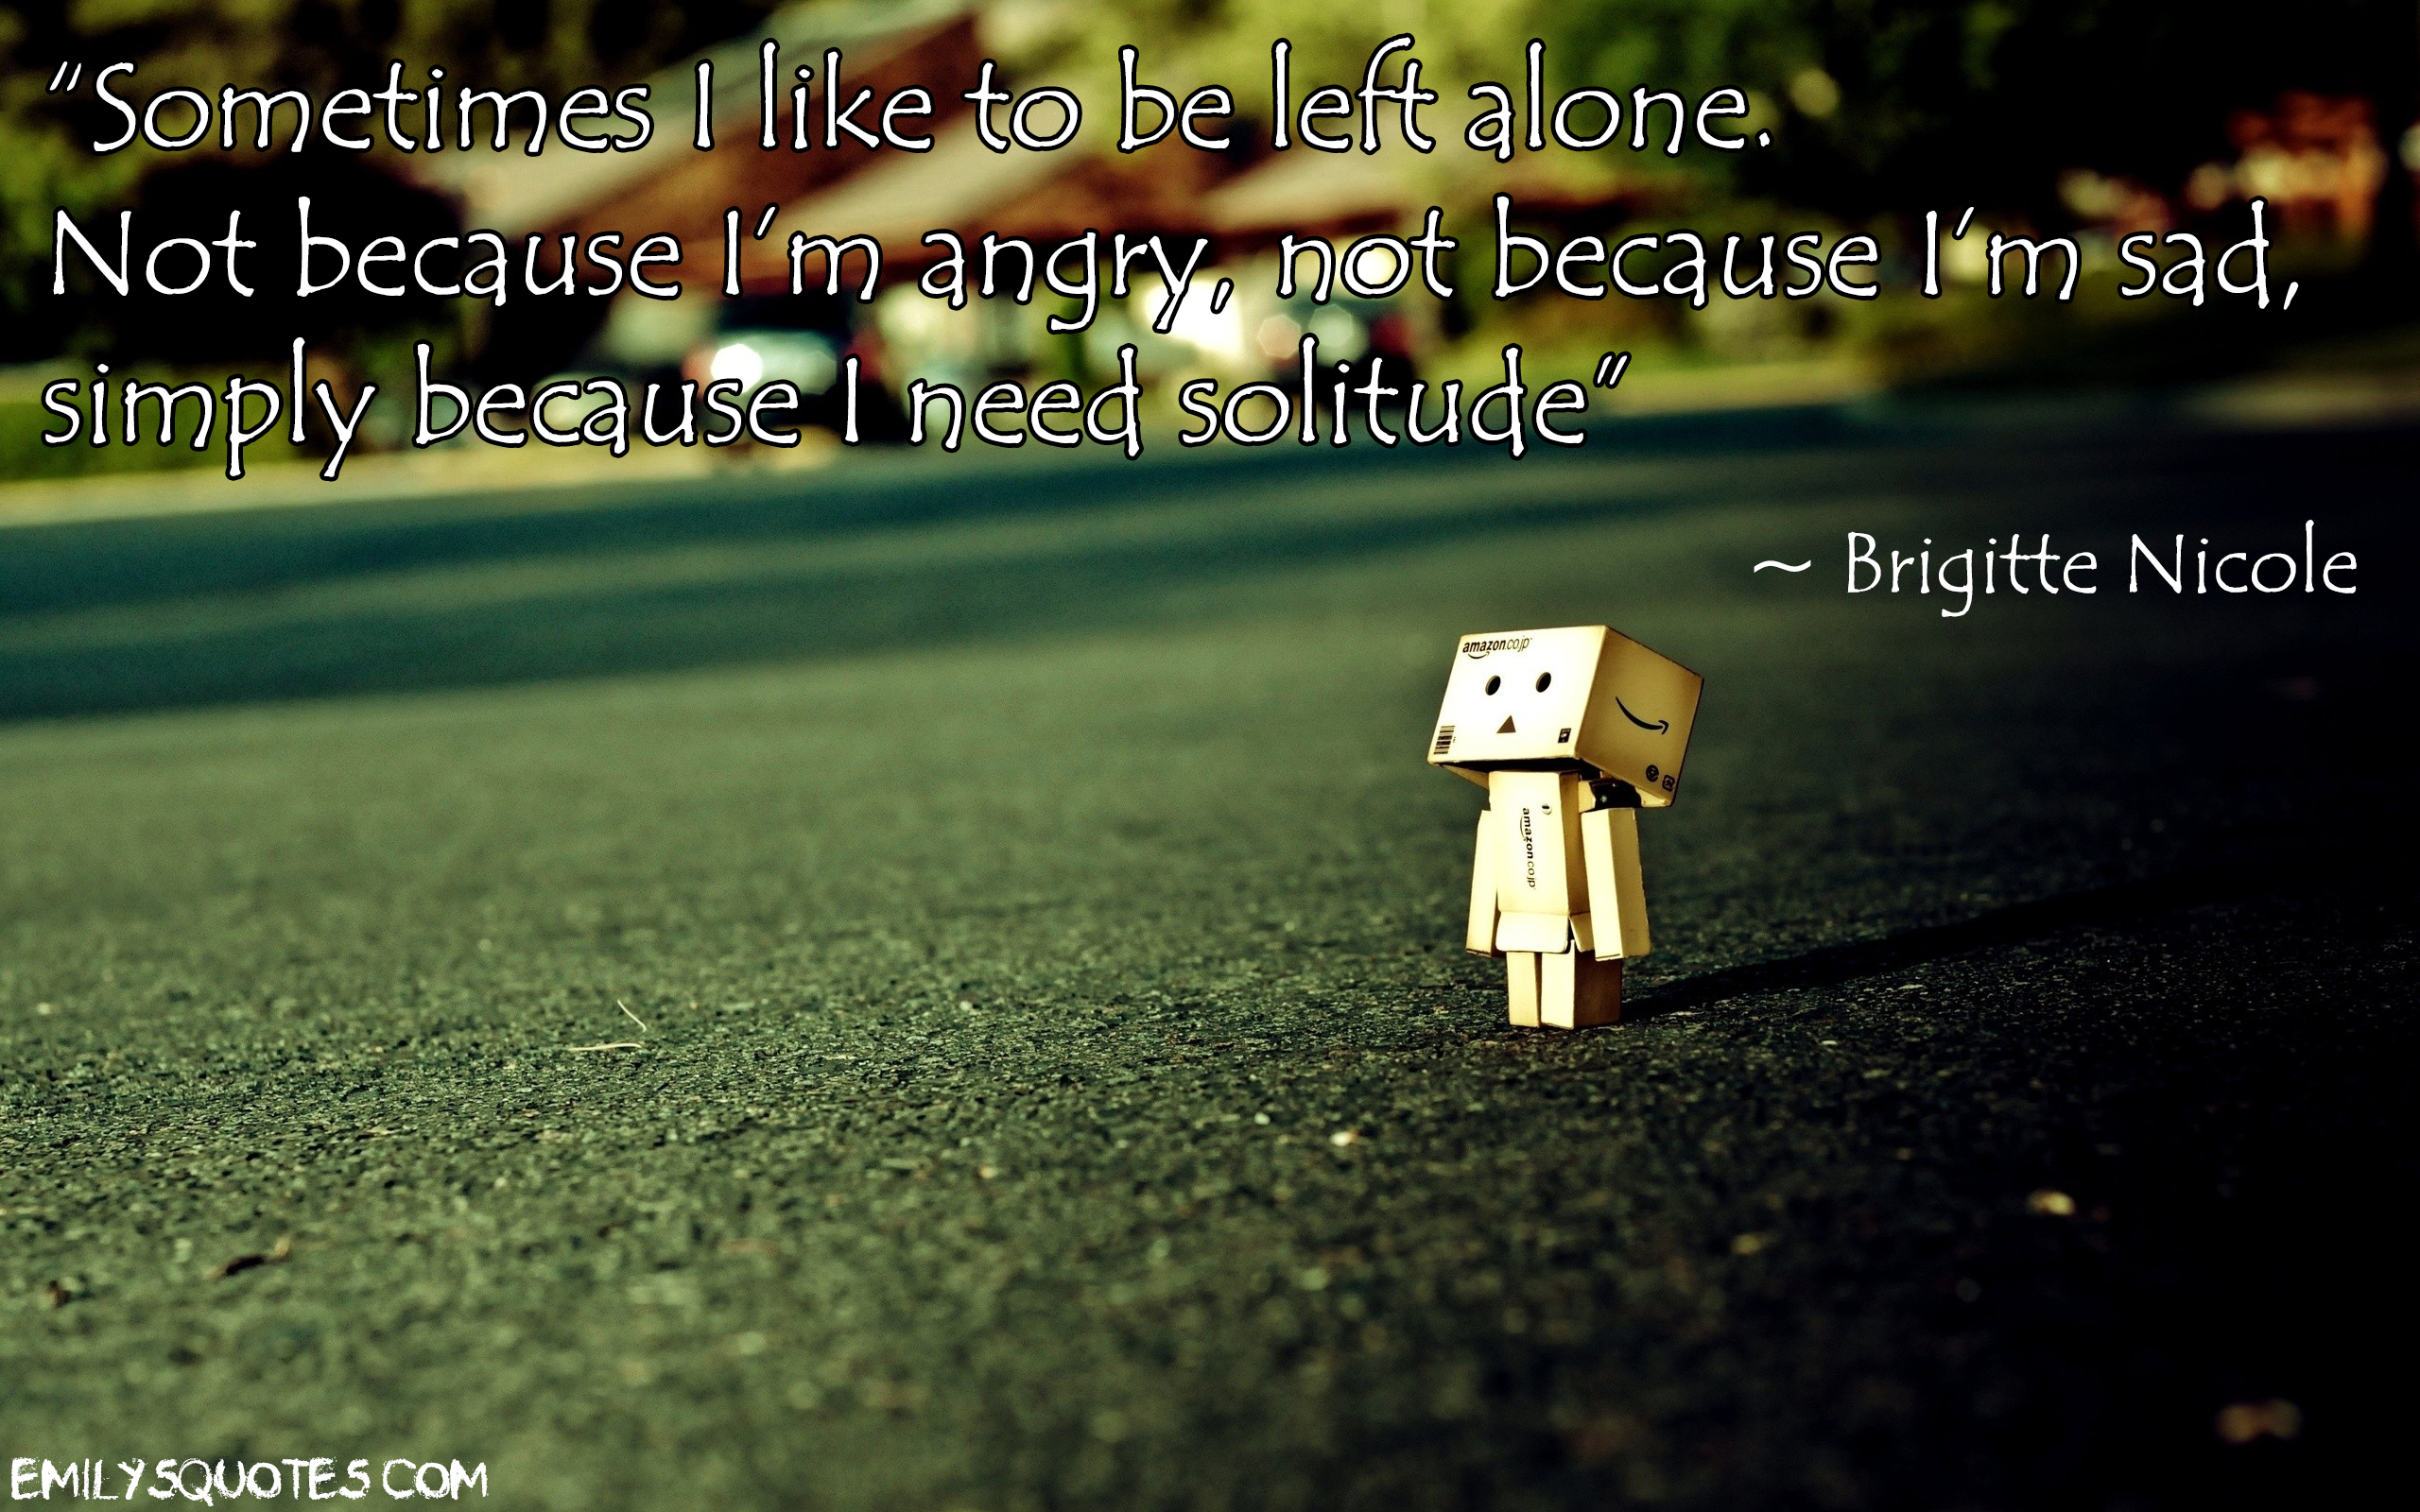 Sometimes I like to be left alone. Not because I’m angry, not because I’m sad, simply because I need solitude